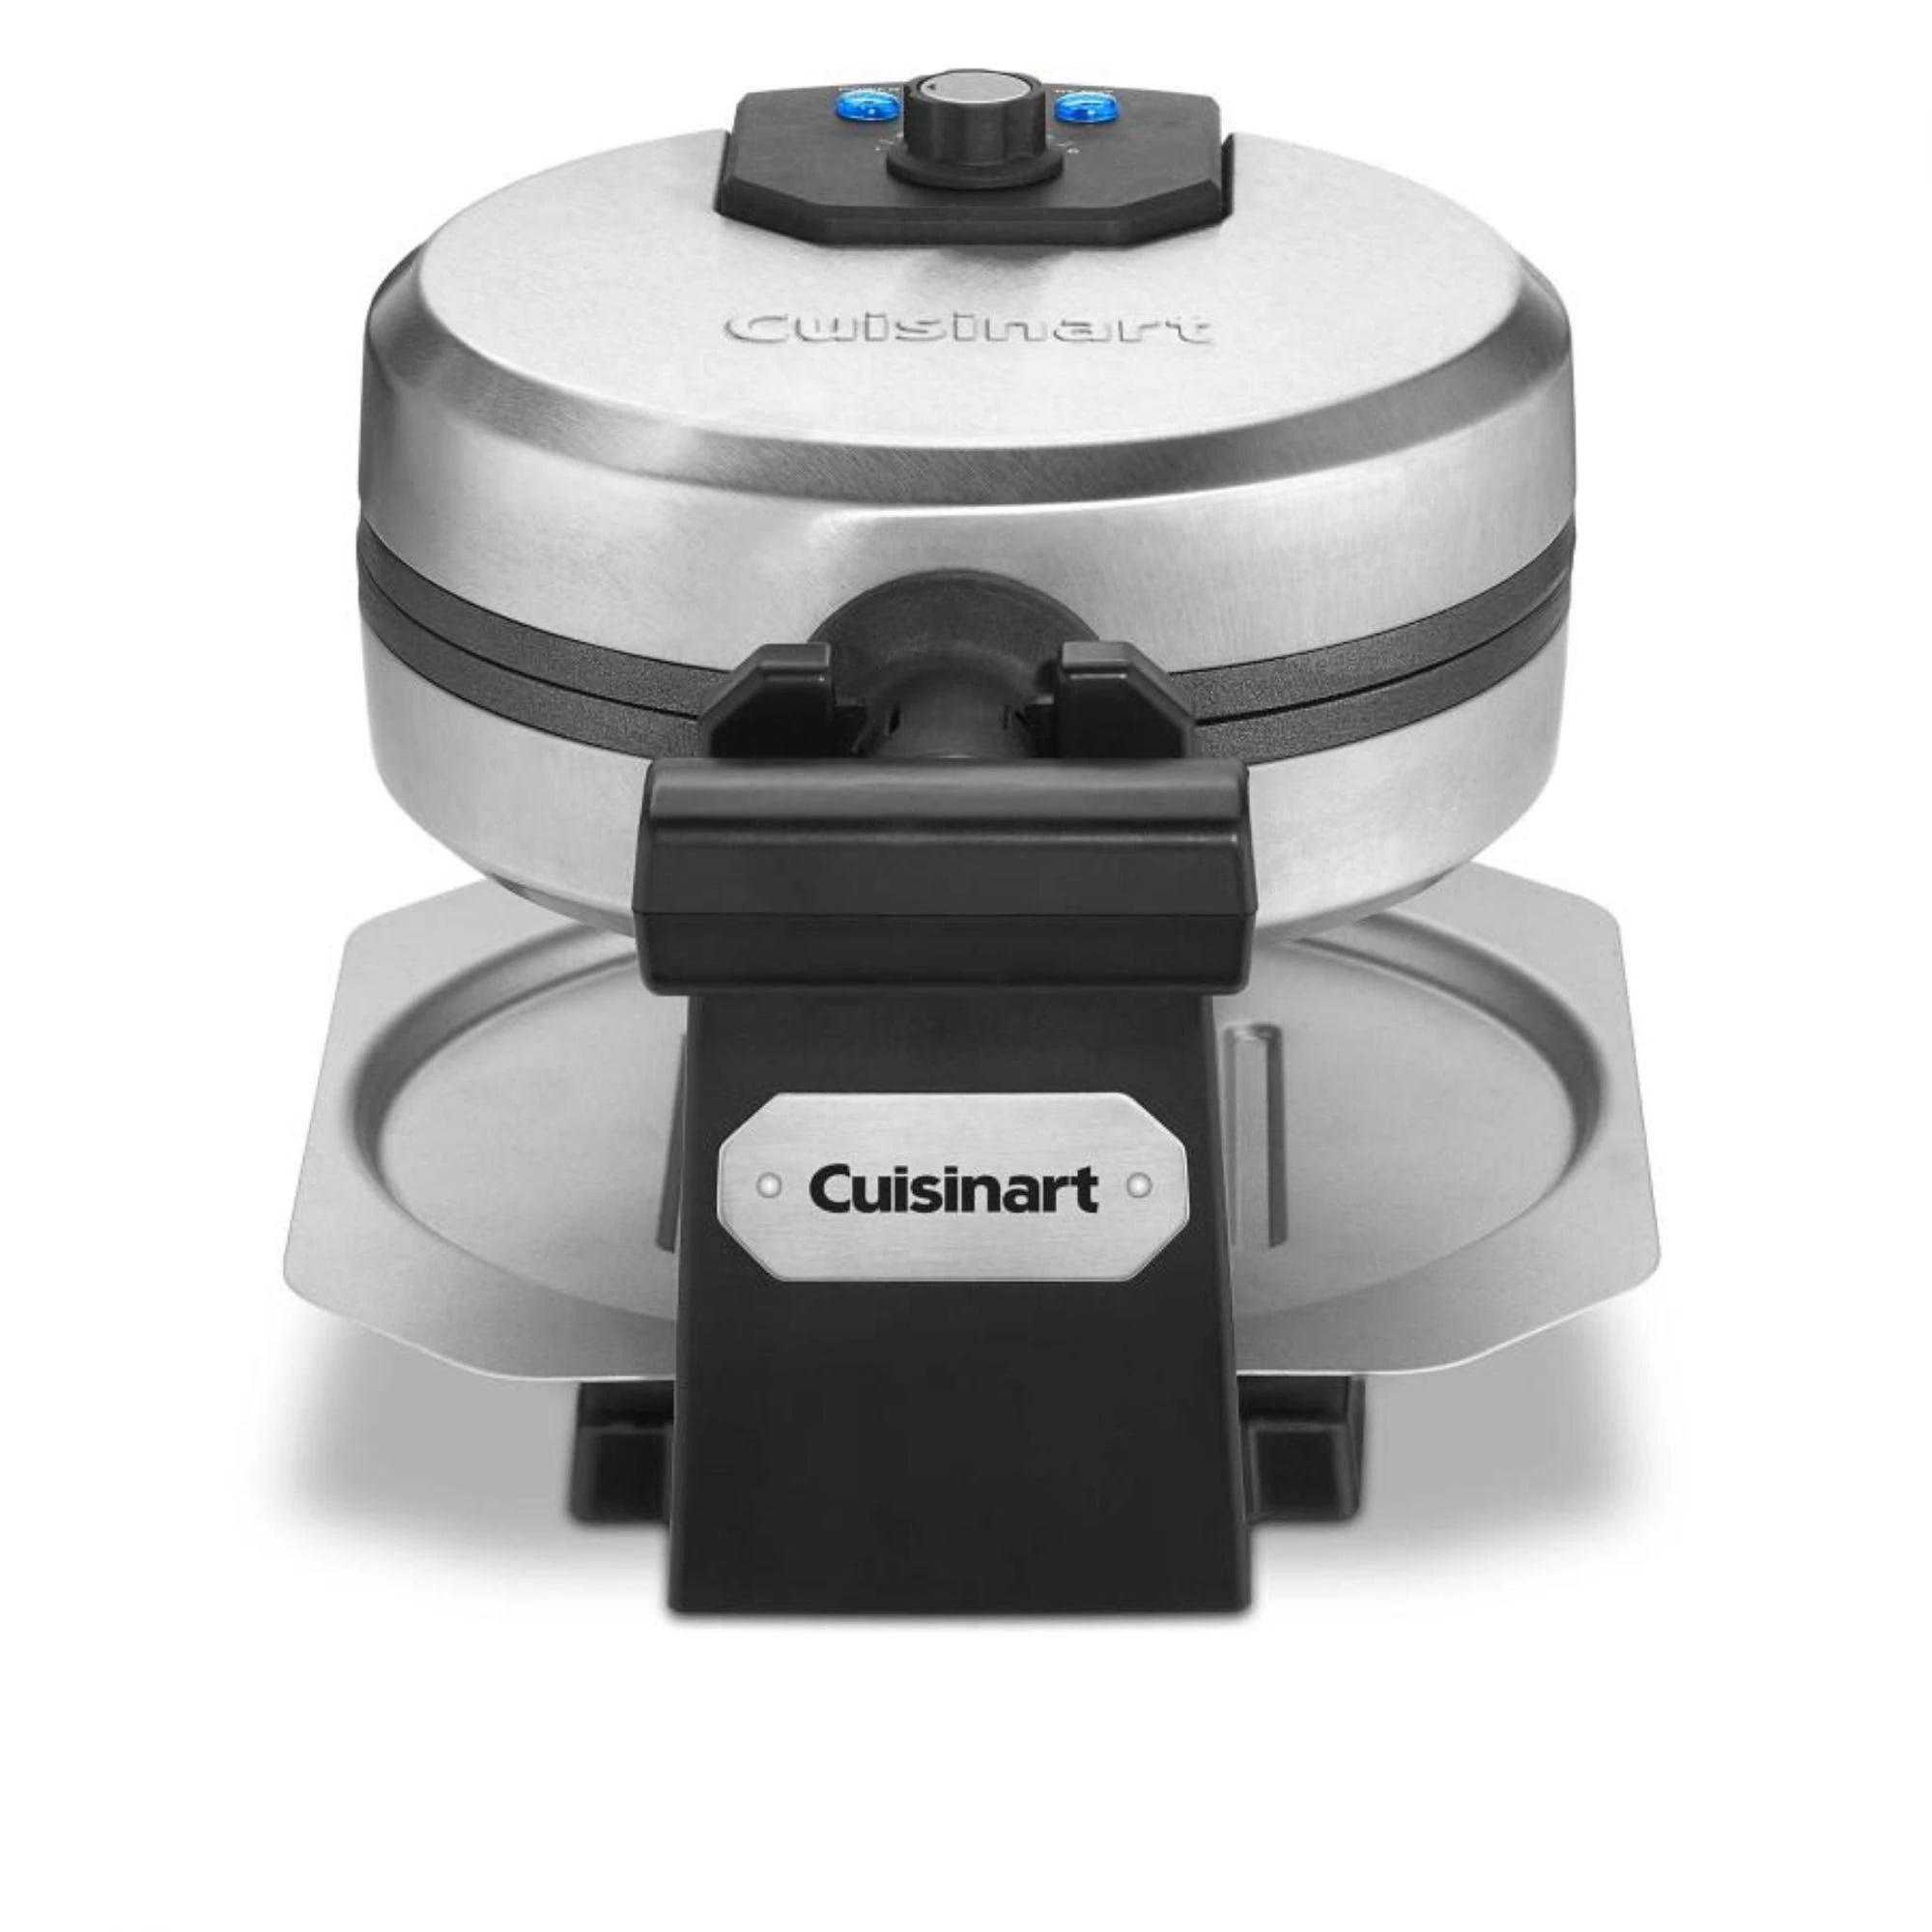 Cuisinart Round Flip Belgian Waffle Maker with Brushed Stainless Steel Housing | Image